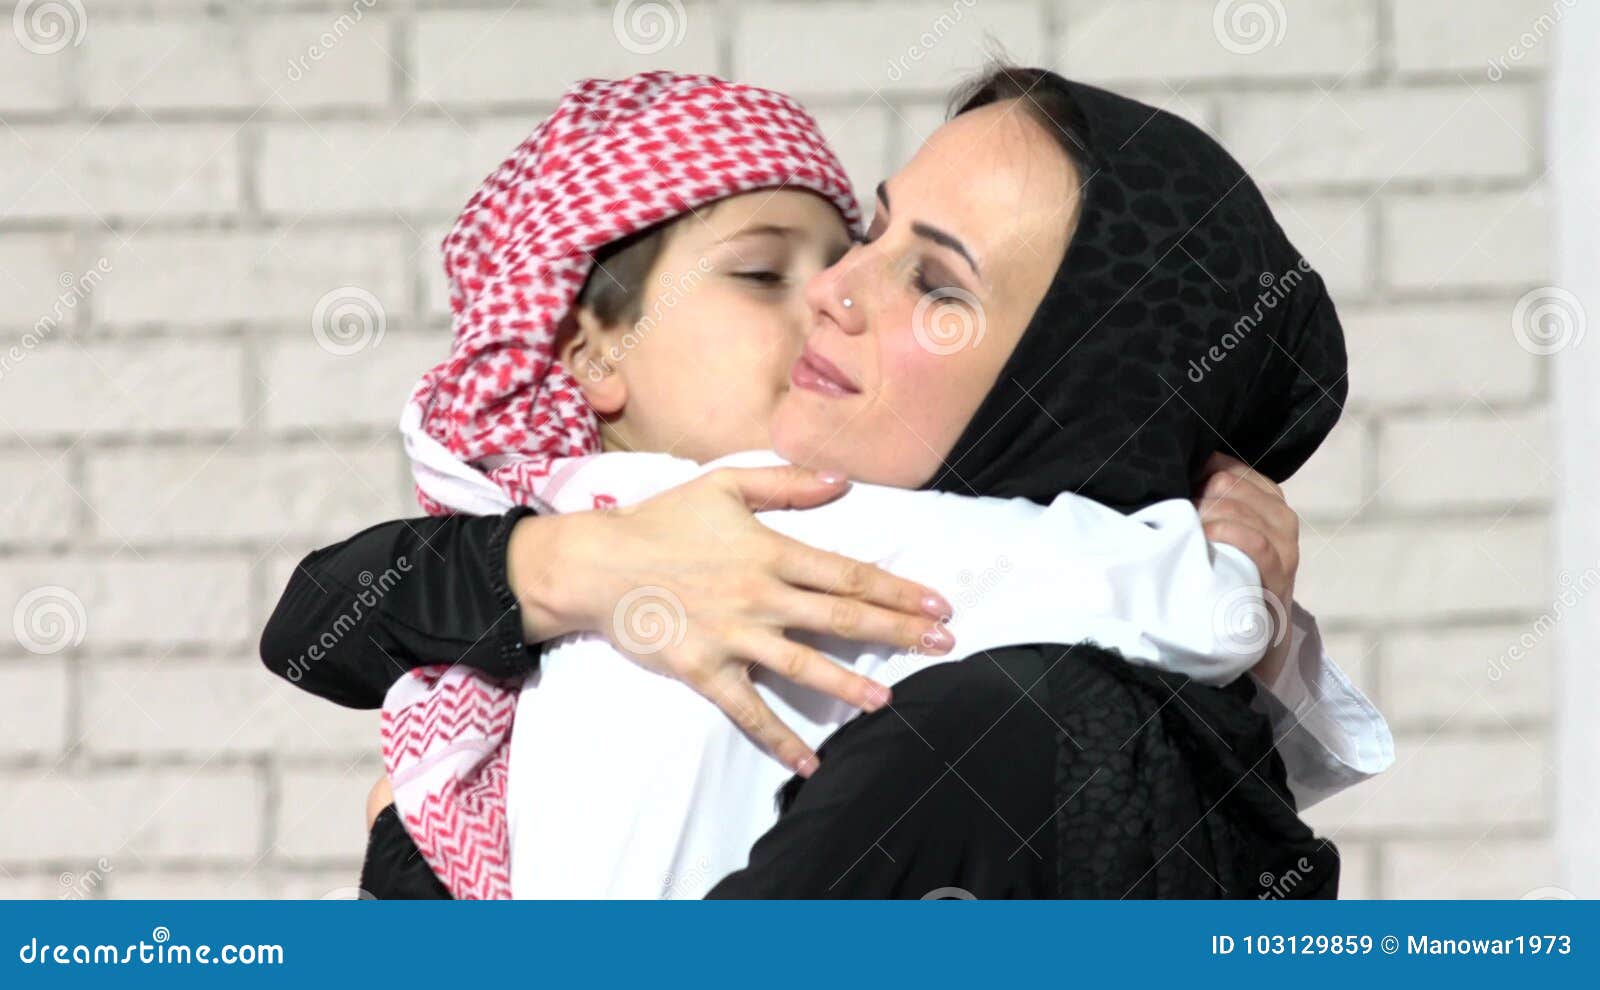 Arabic Mother And Son Posing Indoor Stock Image Image Of Emirates